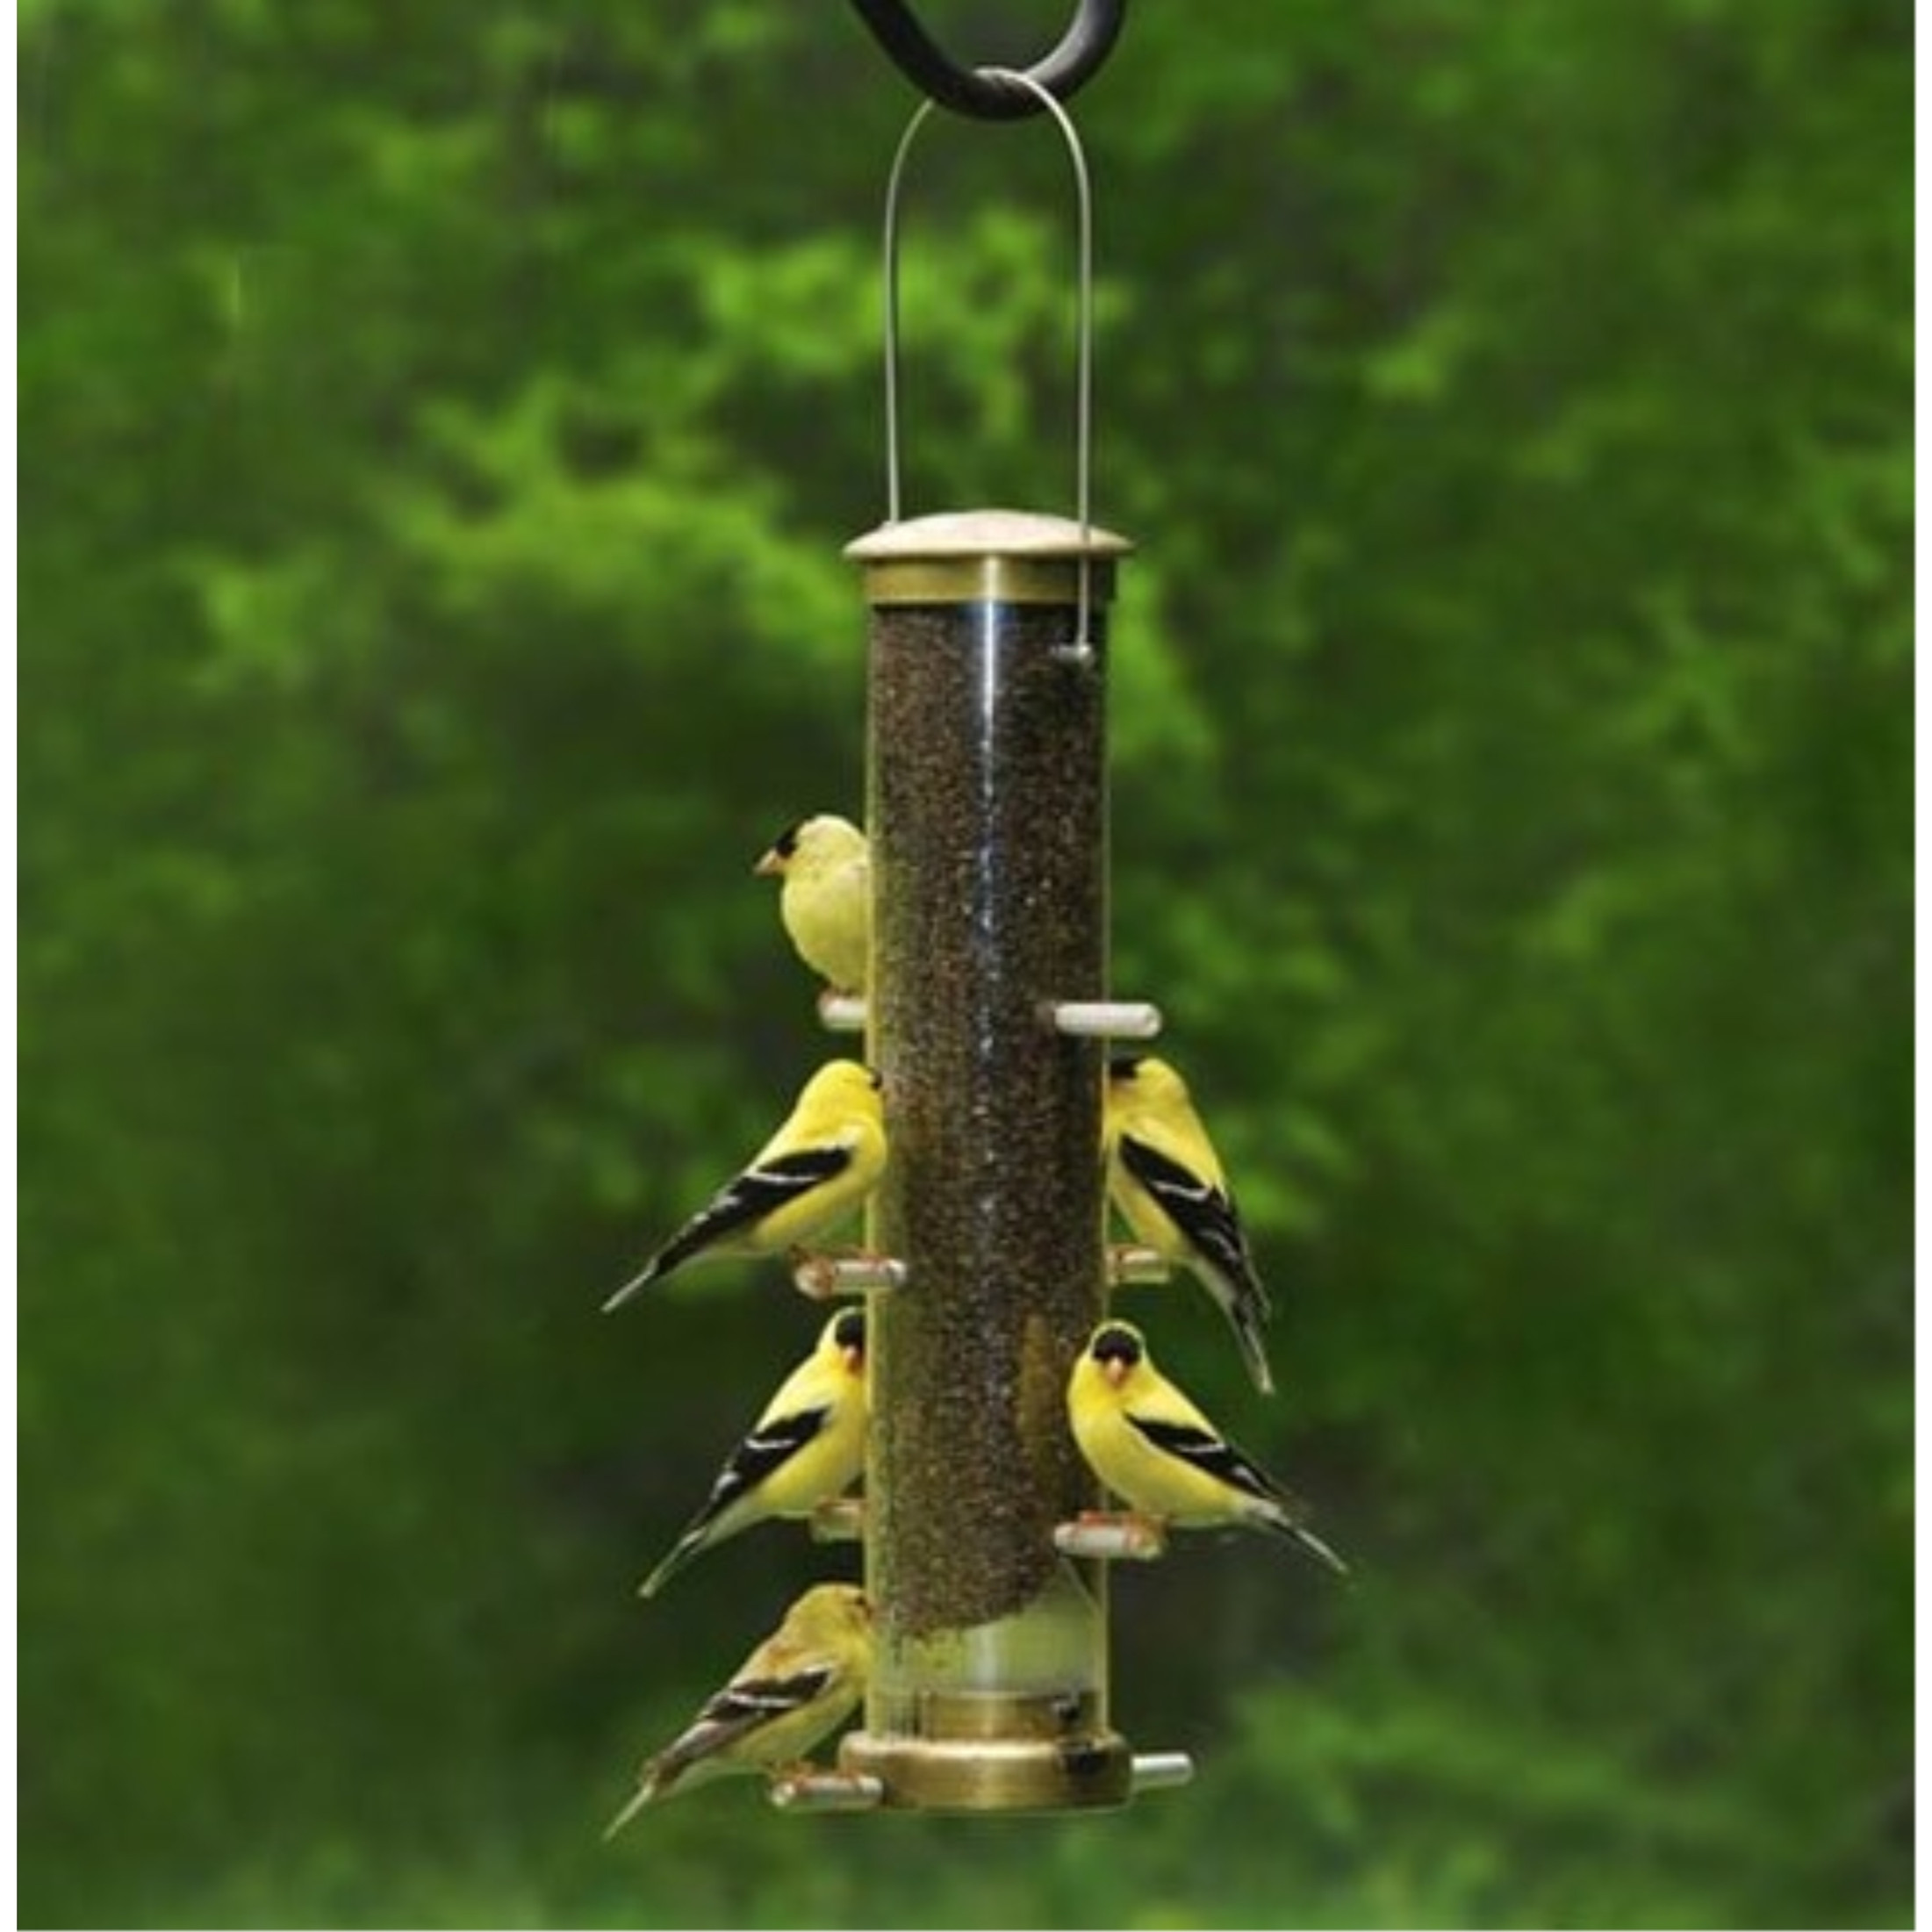 Cole's Nifty Niger Wild Bird Feeder, Clear Polycarbonate, 8 Ports